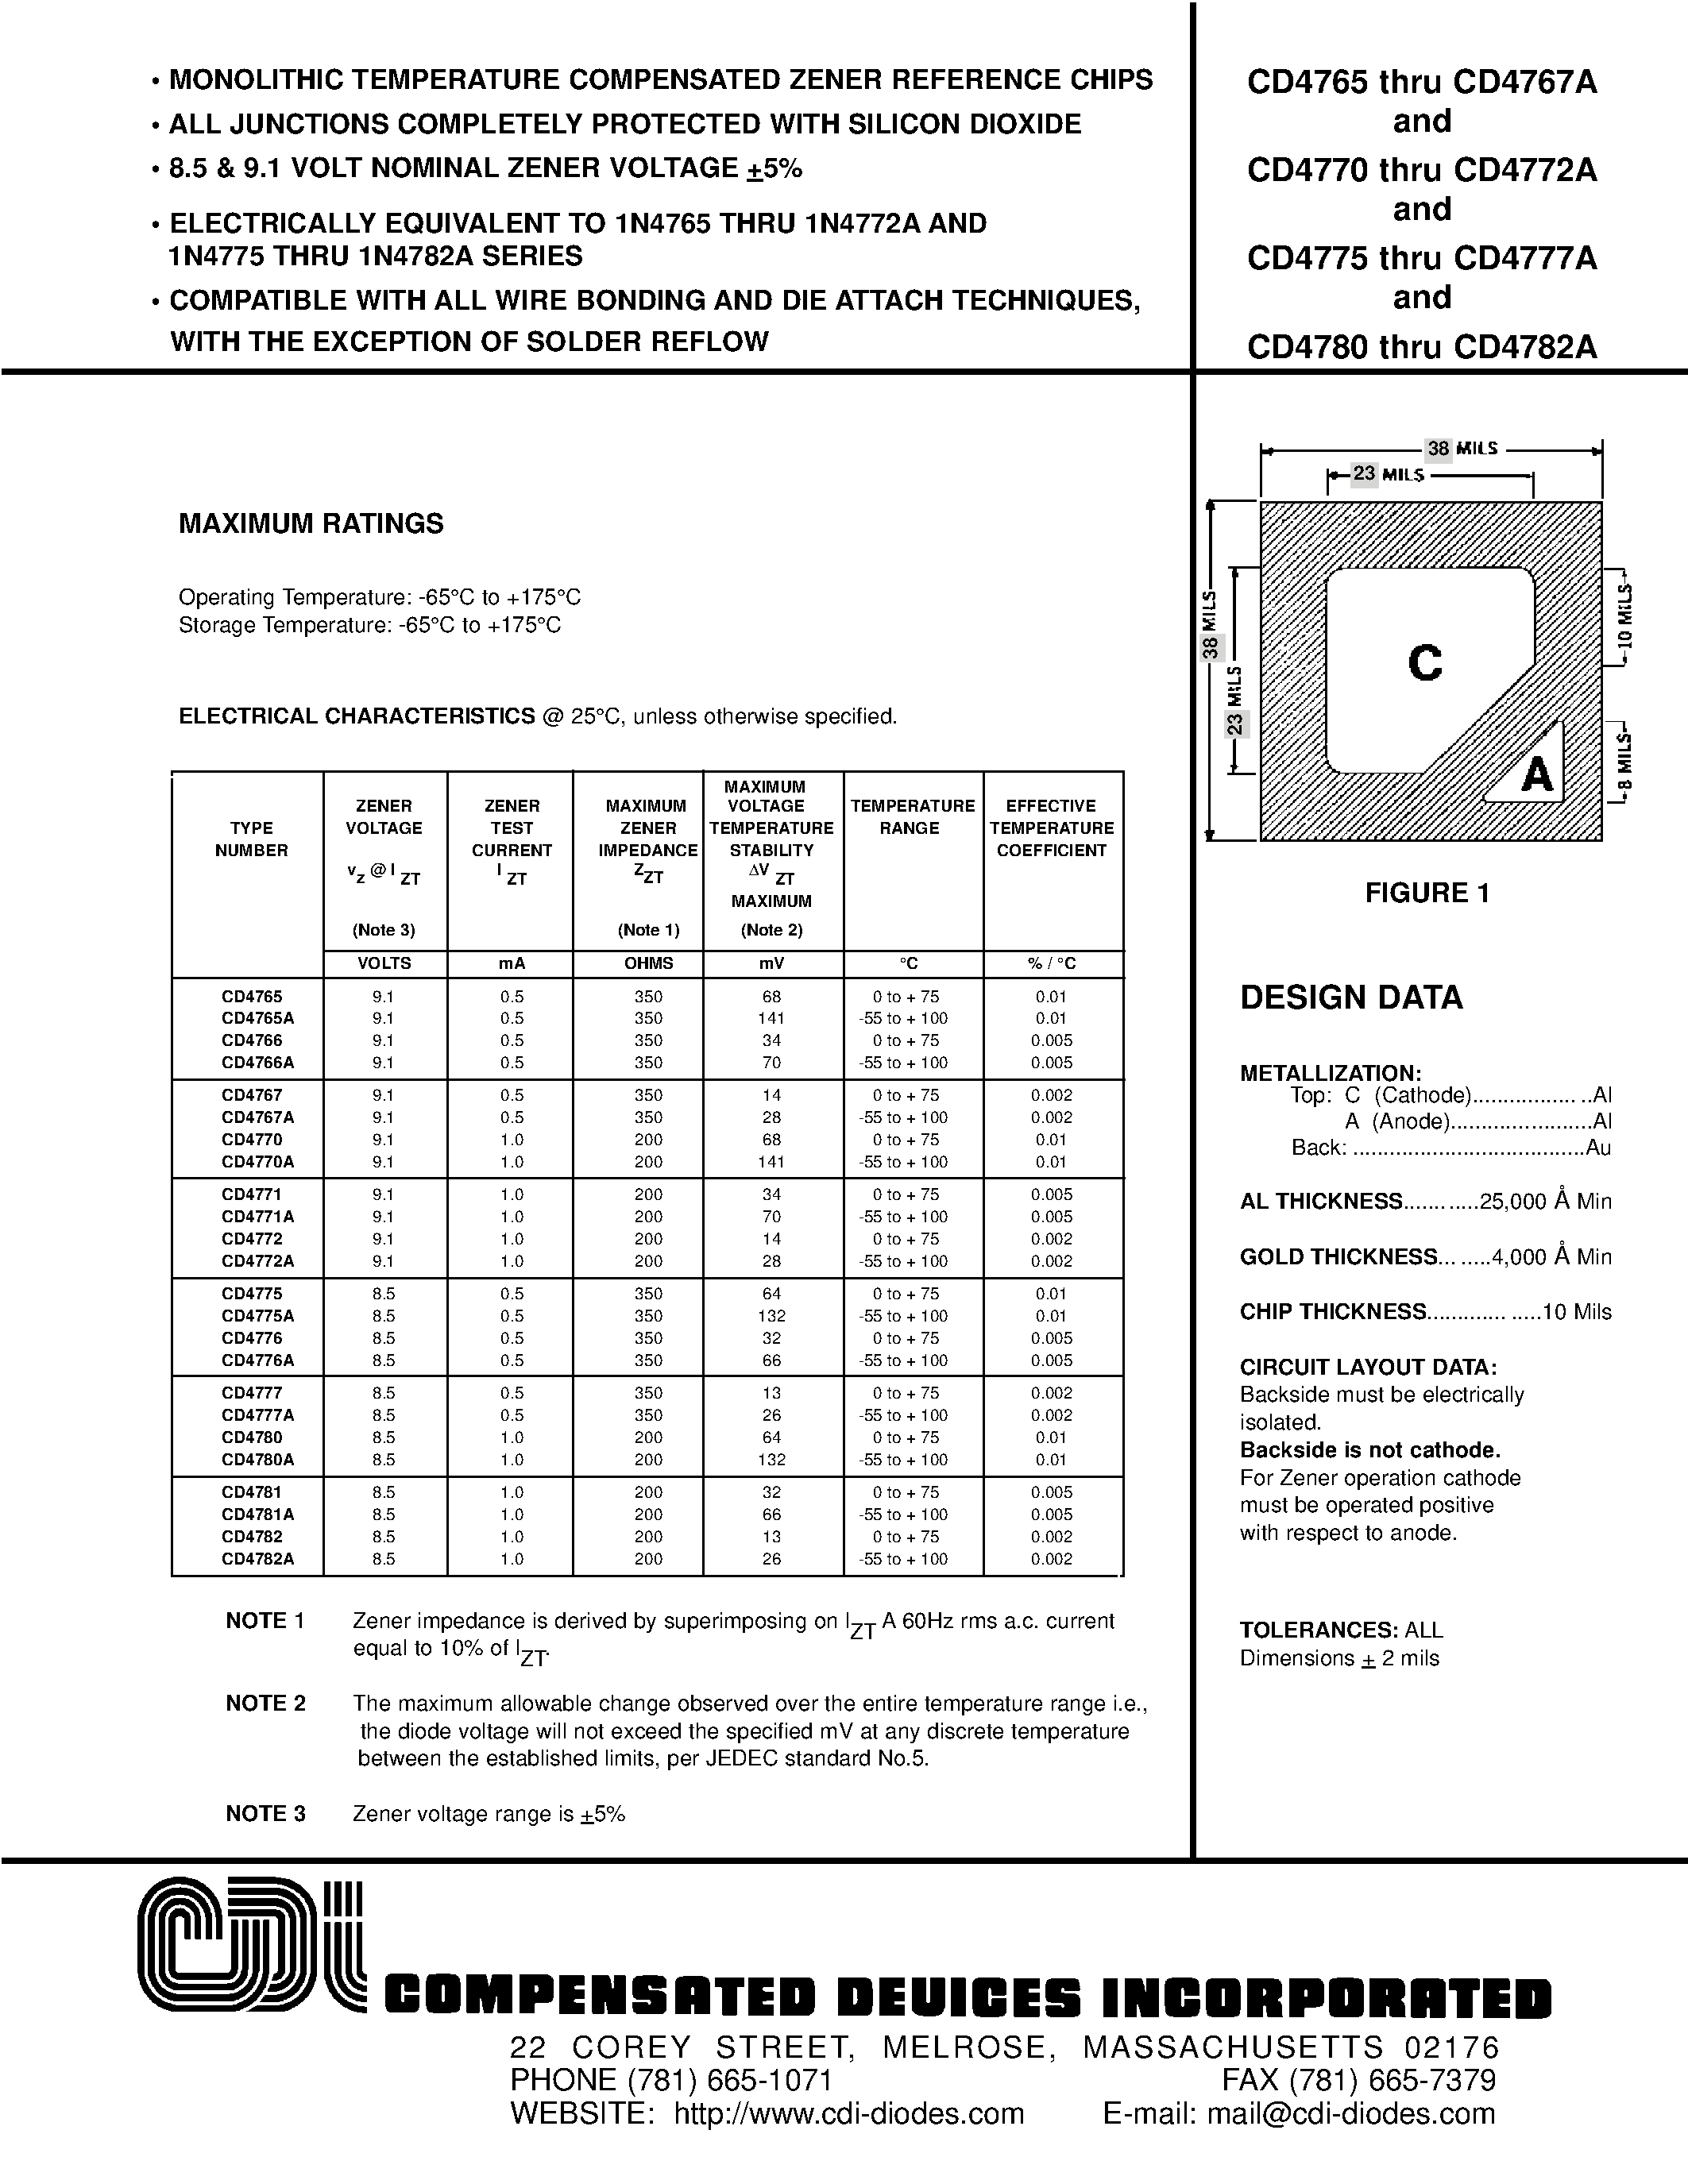 Datasheet CD4776 - MONOLITHIC TEMPERATURE COMPENSATED ZENER REFERENCE CHIPS page 1